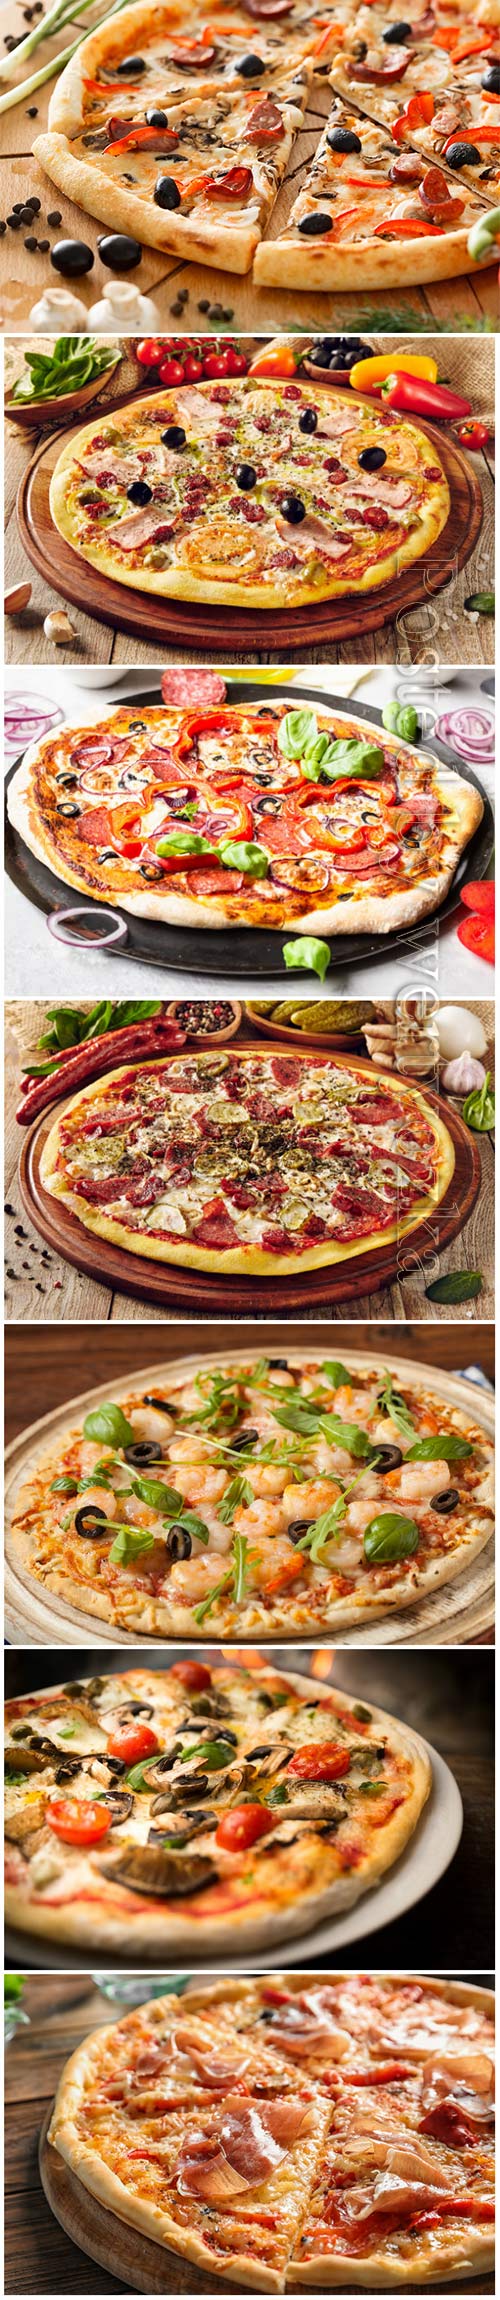 Delicious pizza with different products